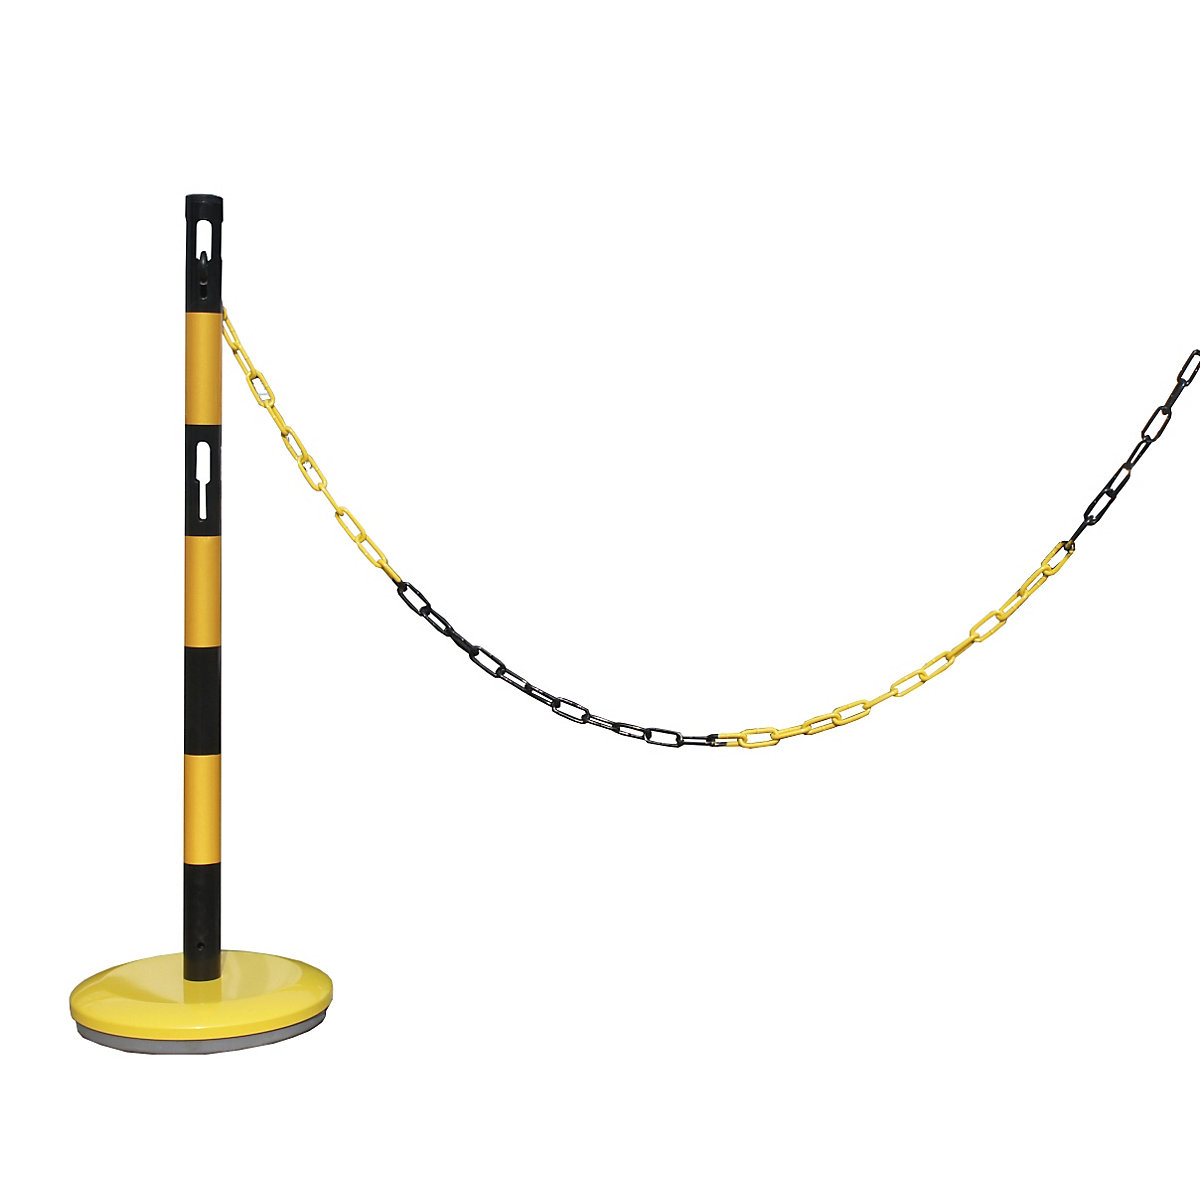 Barrier post extension set with chain – VISO, 1 post, 2.5 m chain, yellow / black-3